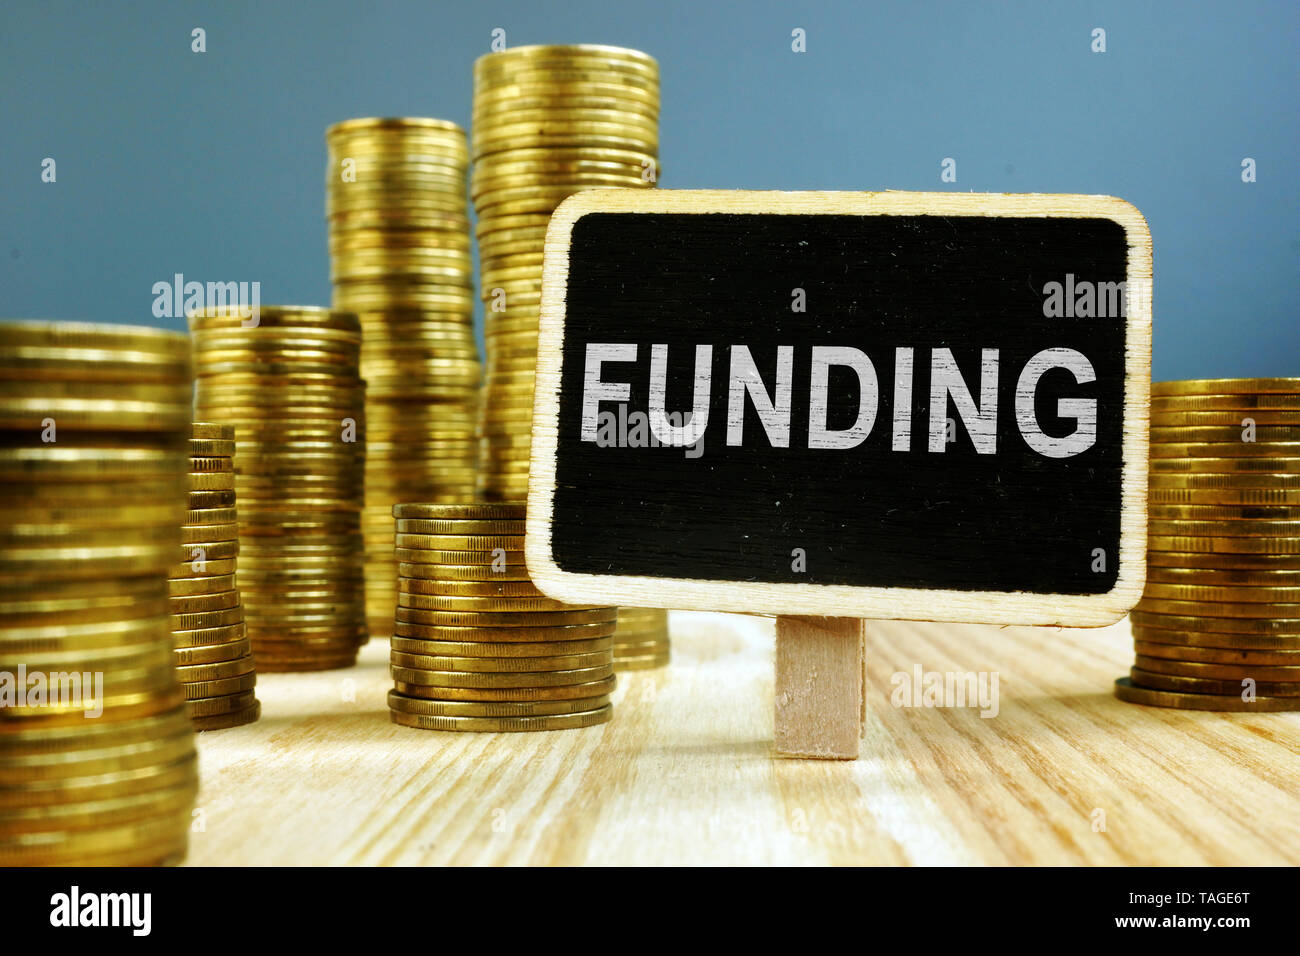 Funding concept. Coins stack on wooden surface. Stock Photo